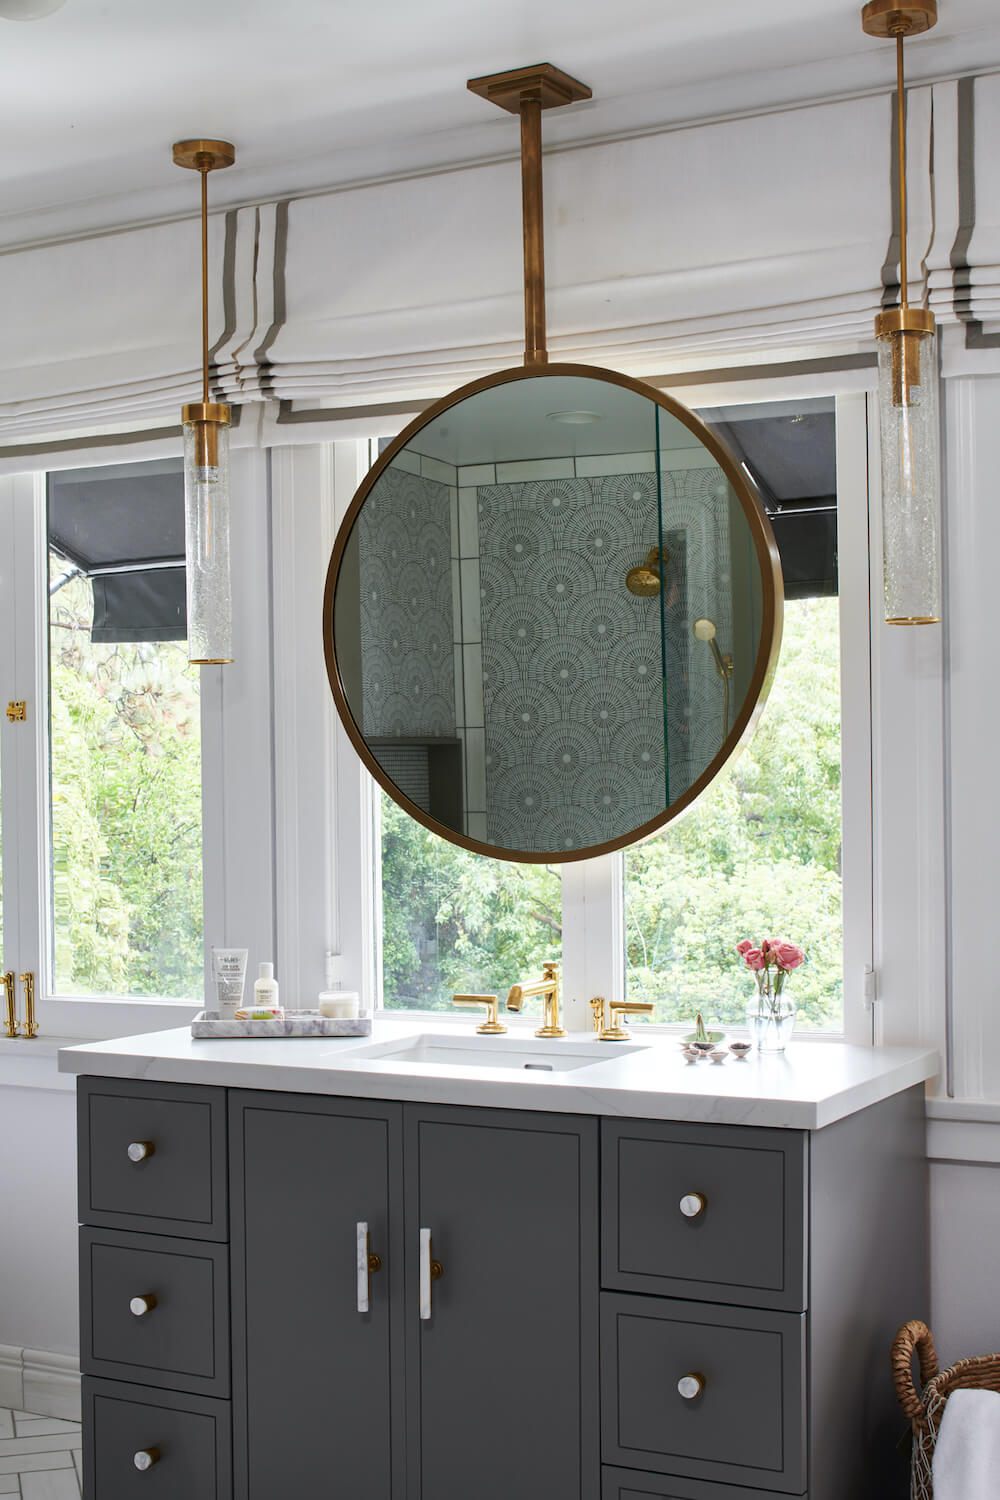 large gray single vanity with white marble countertop and brushed nickel hardware and gold faucet and fixtures and hanging circular mirror infront of window after renovation